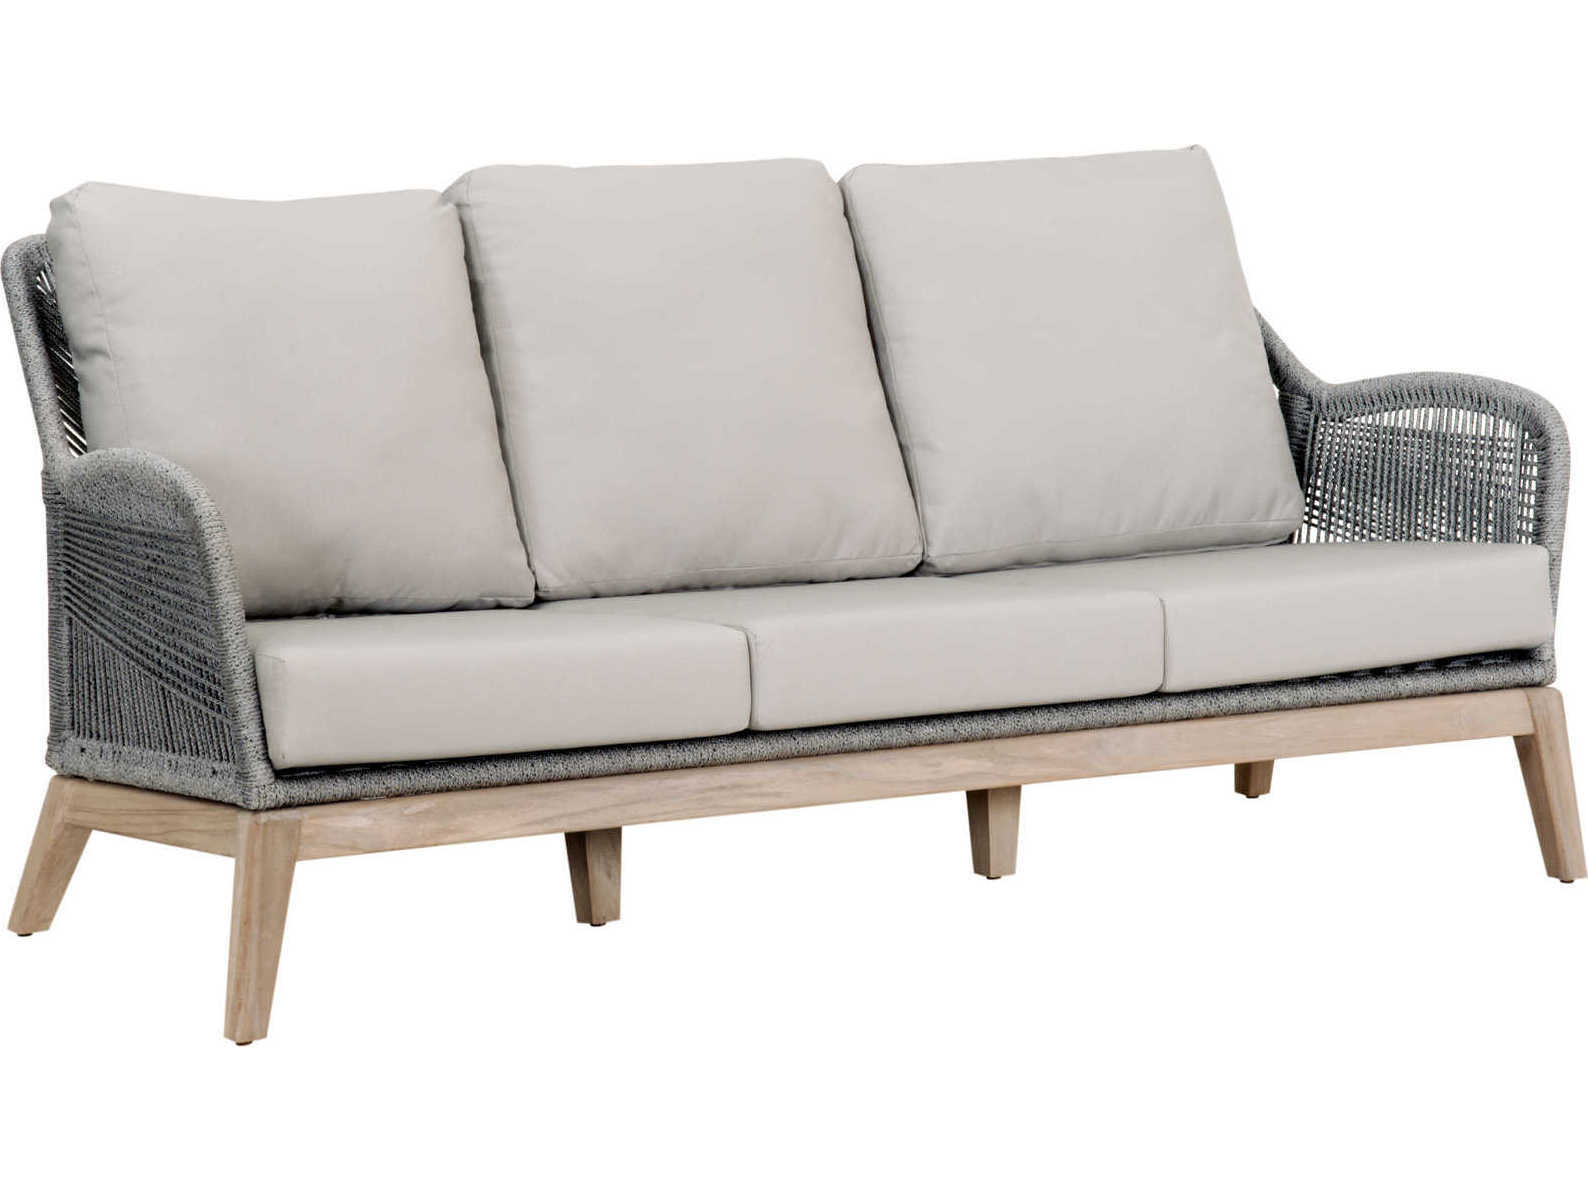 Essentials for Living Outdoor Woven Taupe & White Flat Rope with Gray Teak  Sofa with Performance Pumice Cushion